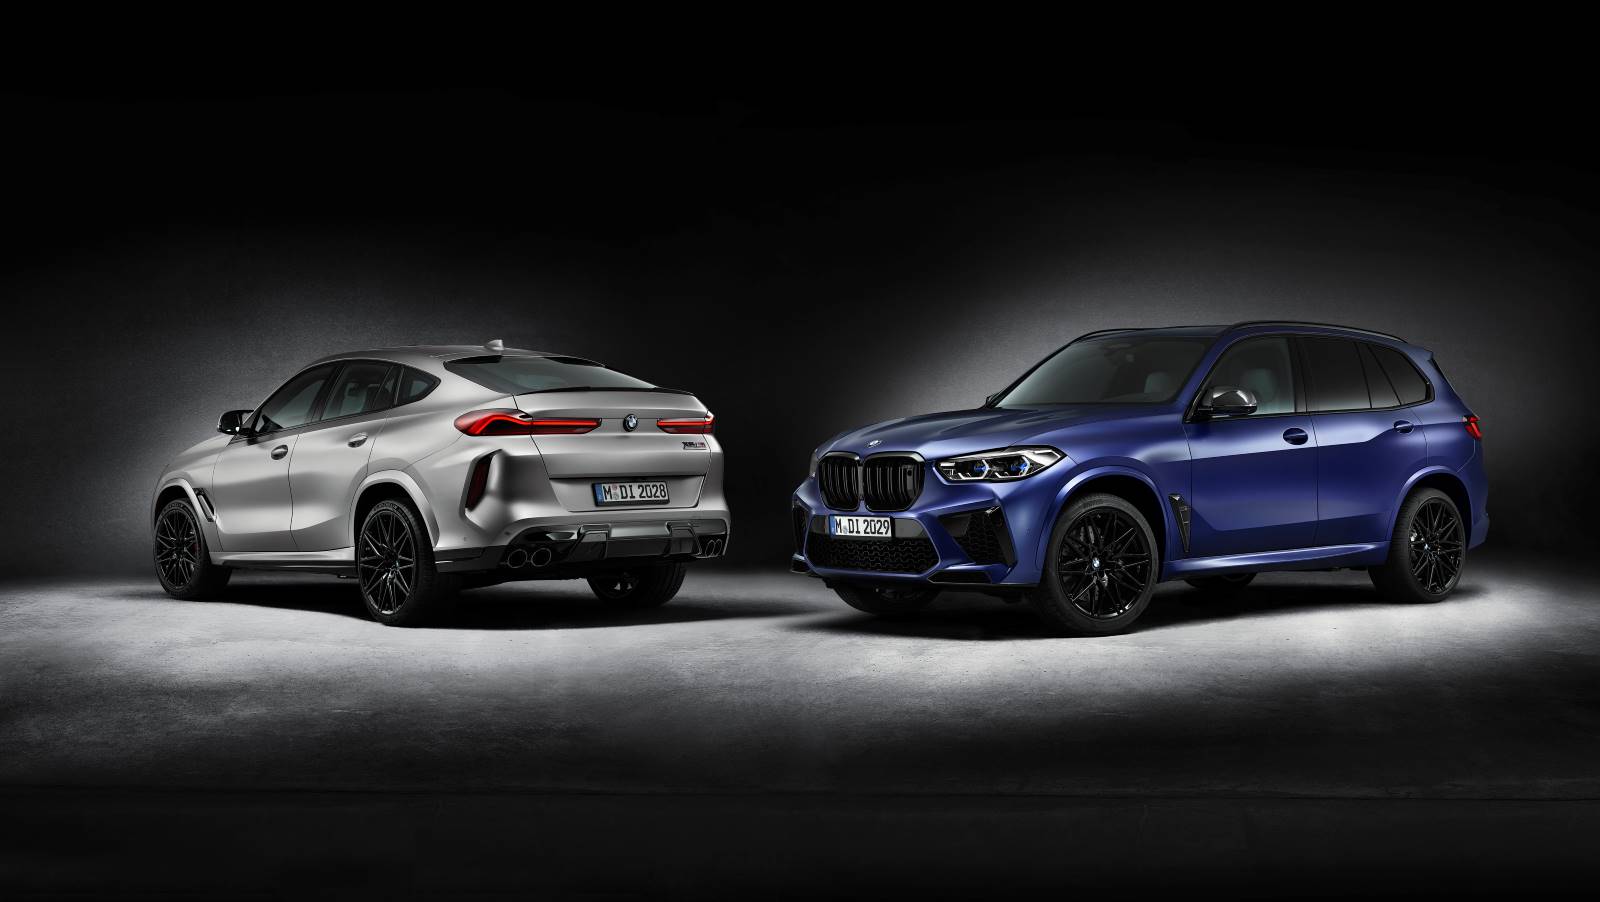 Side by side, the BMW M Series X6 M Sports Activity Coupe in silver and the M Series BMW X5 M Sports Activity Vehicle in blue